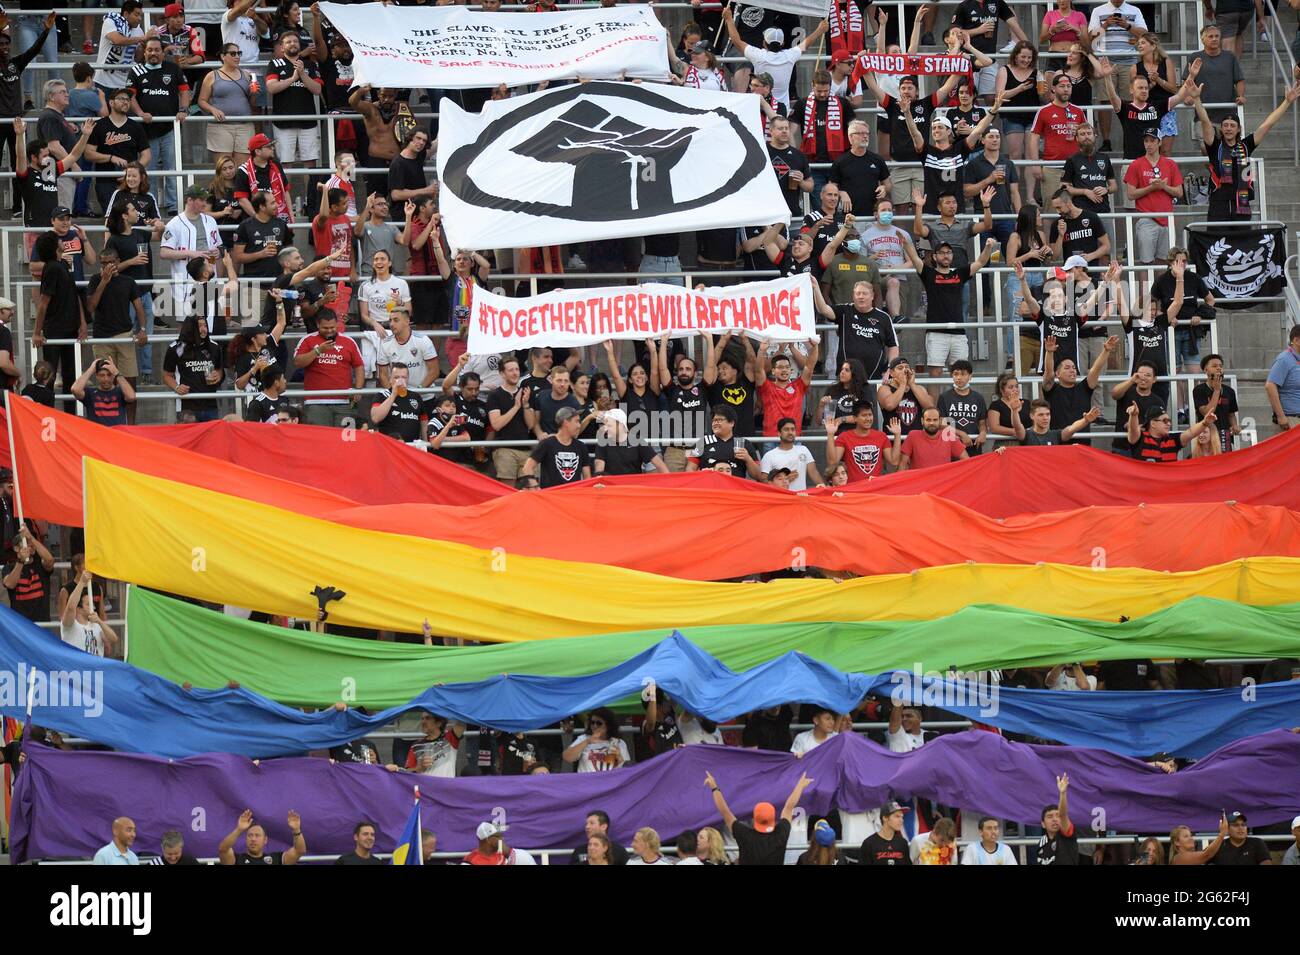 Washington, Dc, USA. 2nd Mar, 2020. 20210619 - The D.C. United supporters section display the colors of the rainbow flag before UnitedÃs match against Inter Miami FC at Audi Field in Washington. Credit: Chuck Myers/ZUMA Wire/Alamy Live News Stock Photo